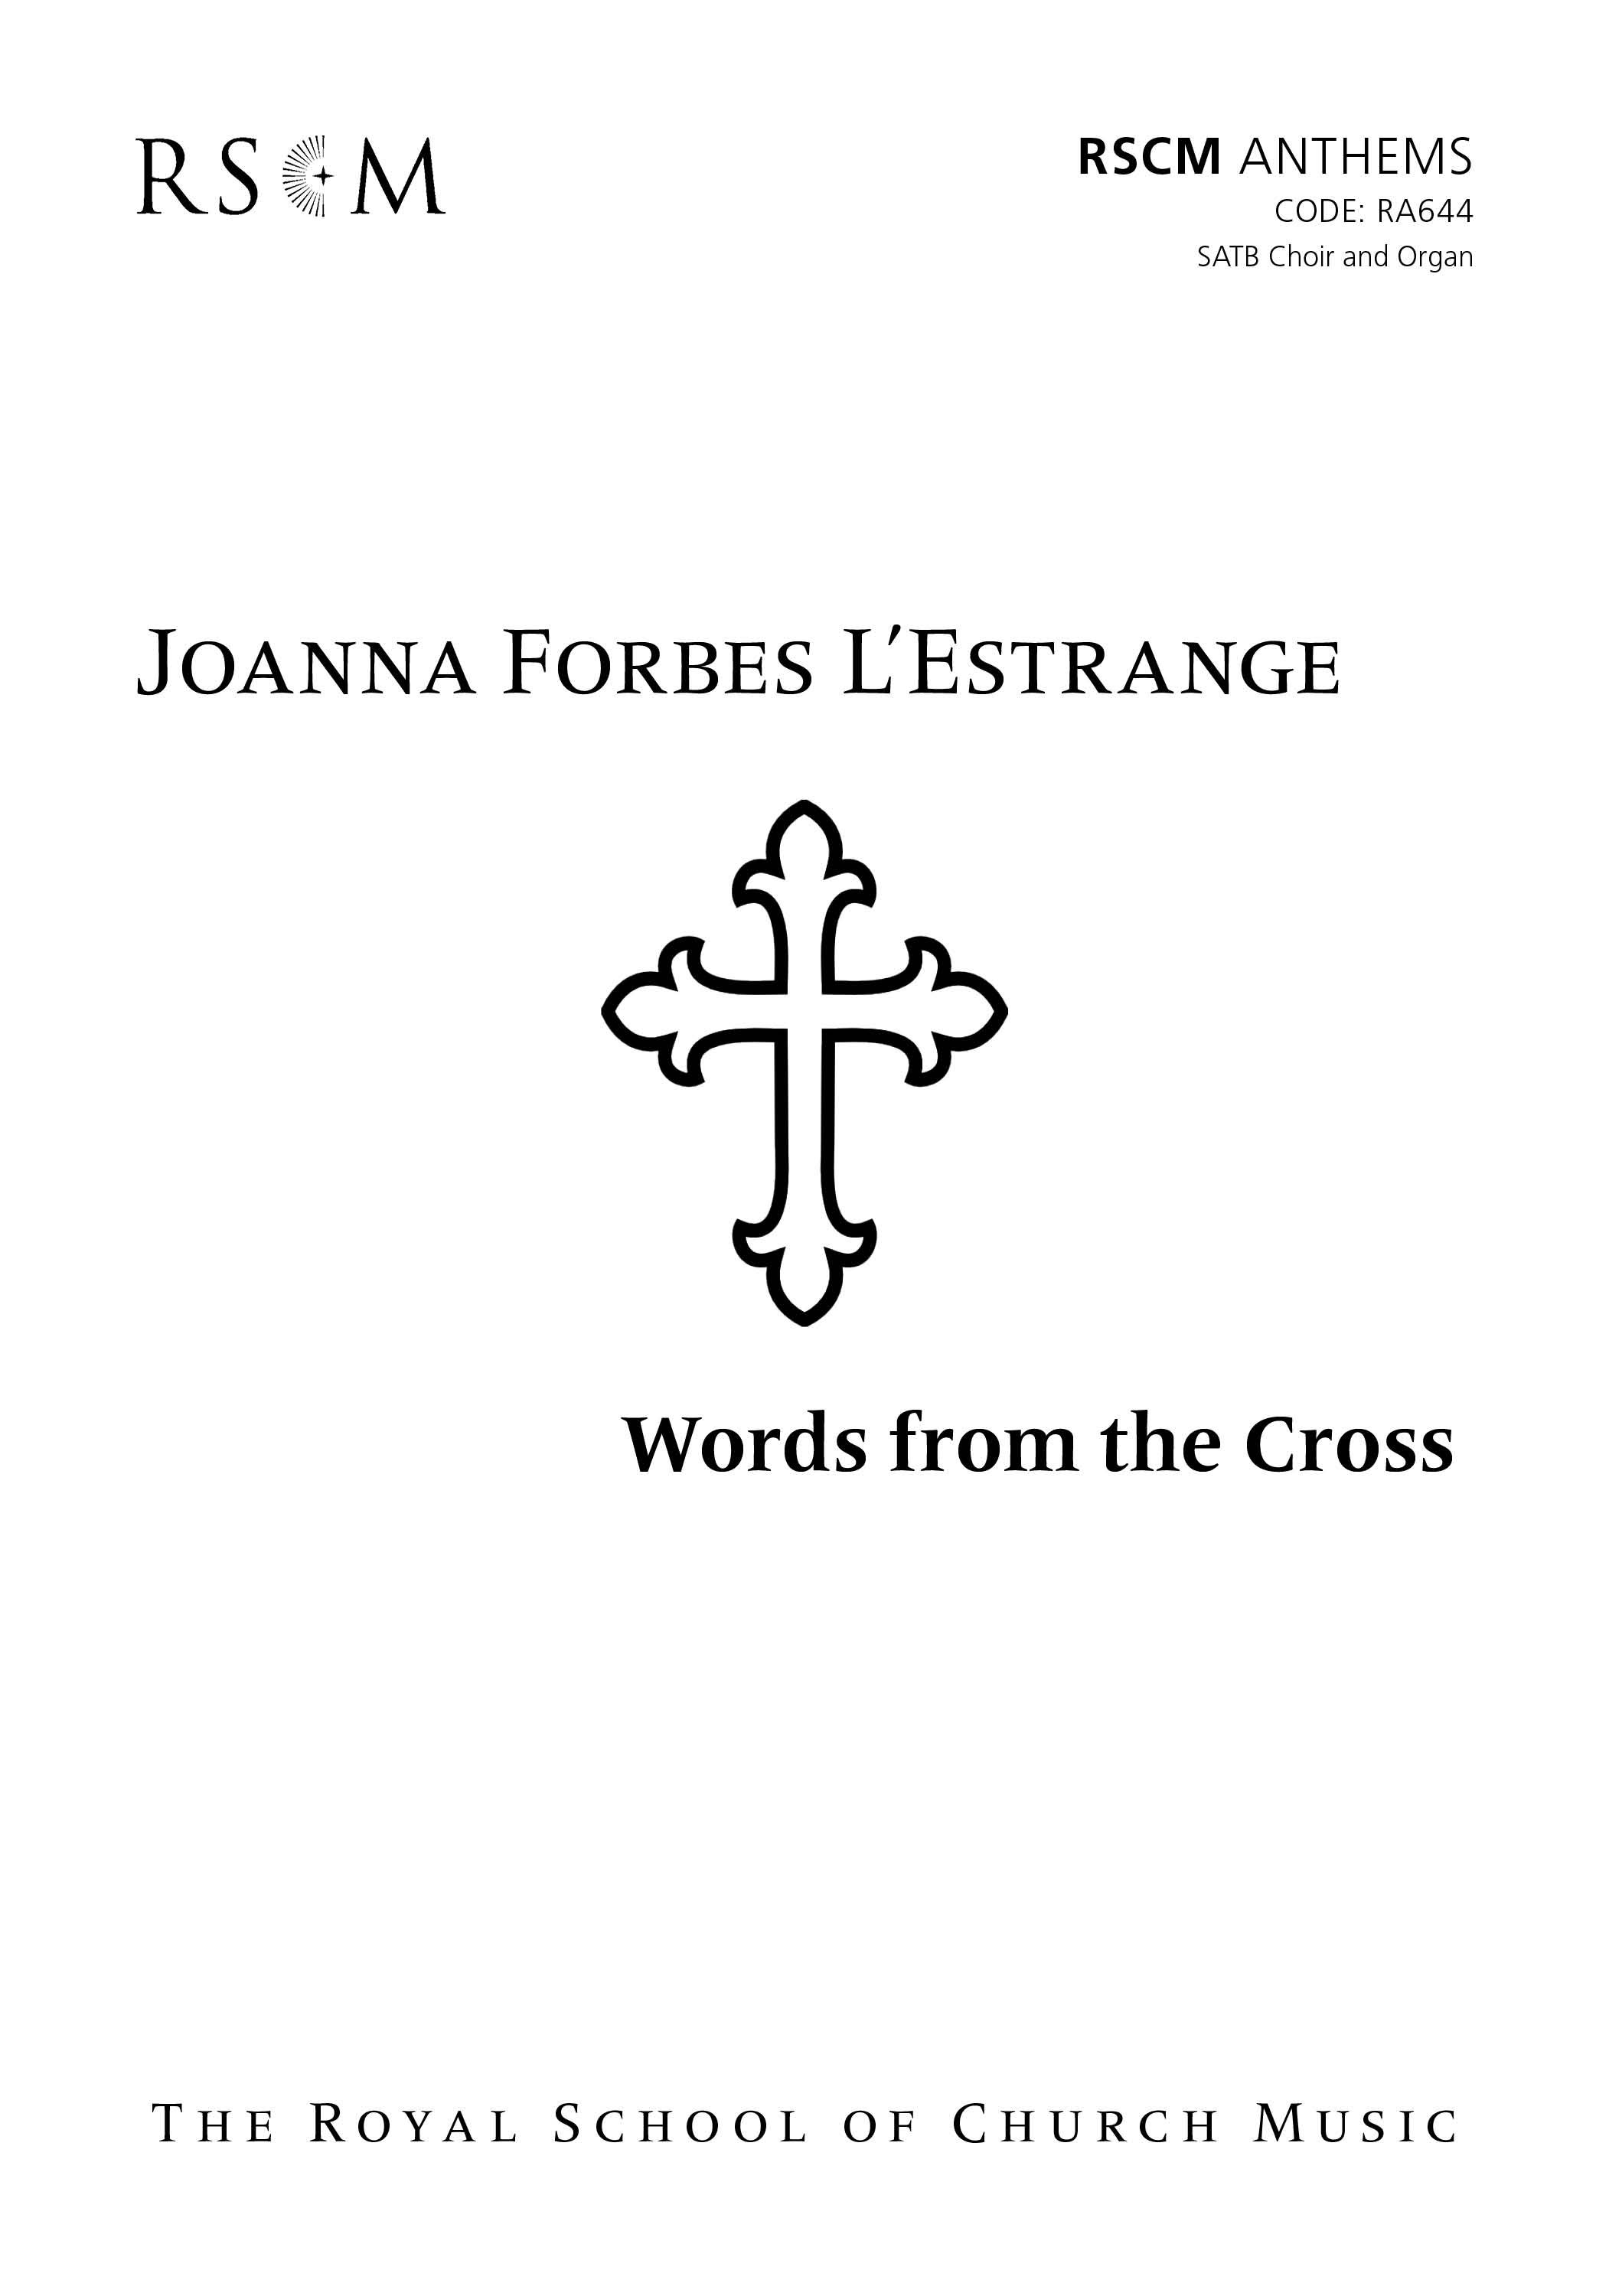 Words from the Cross COVER.jpg